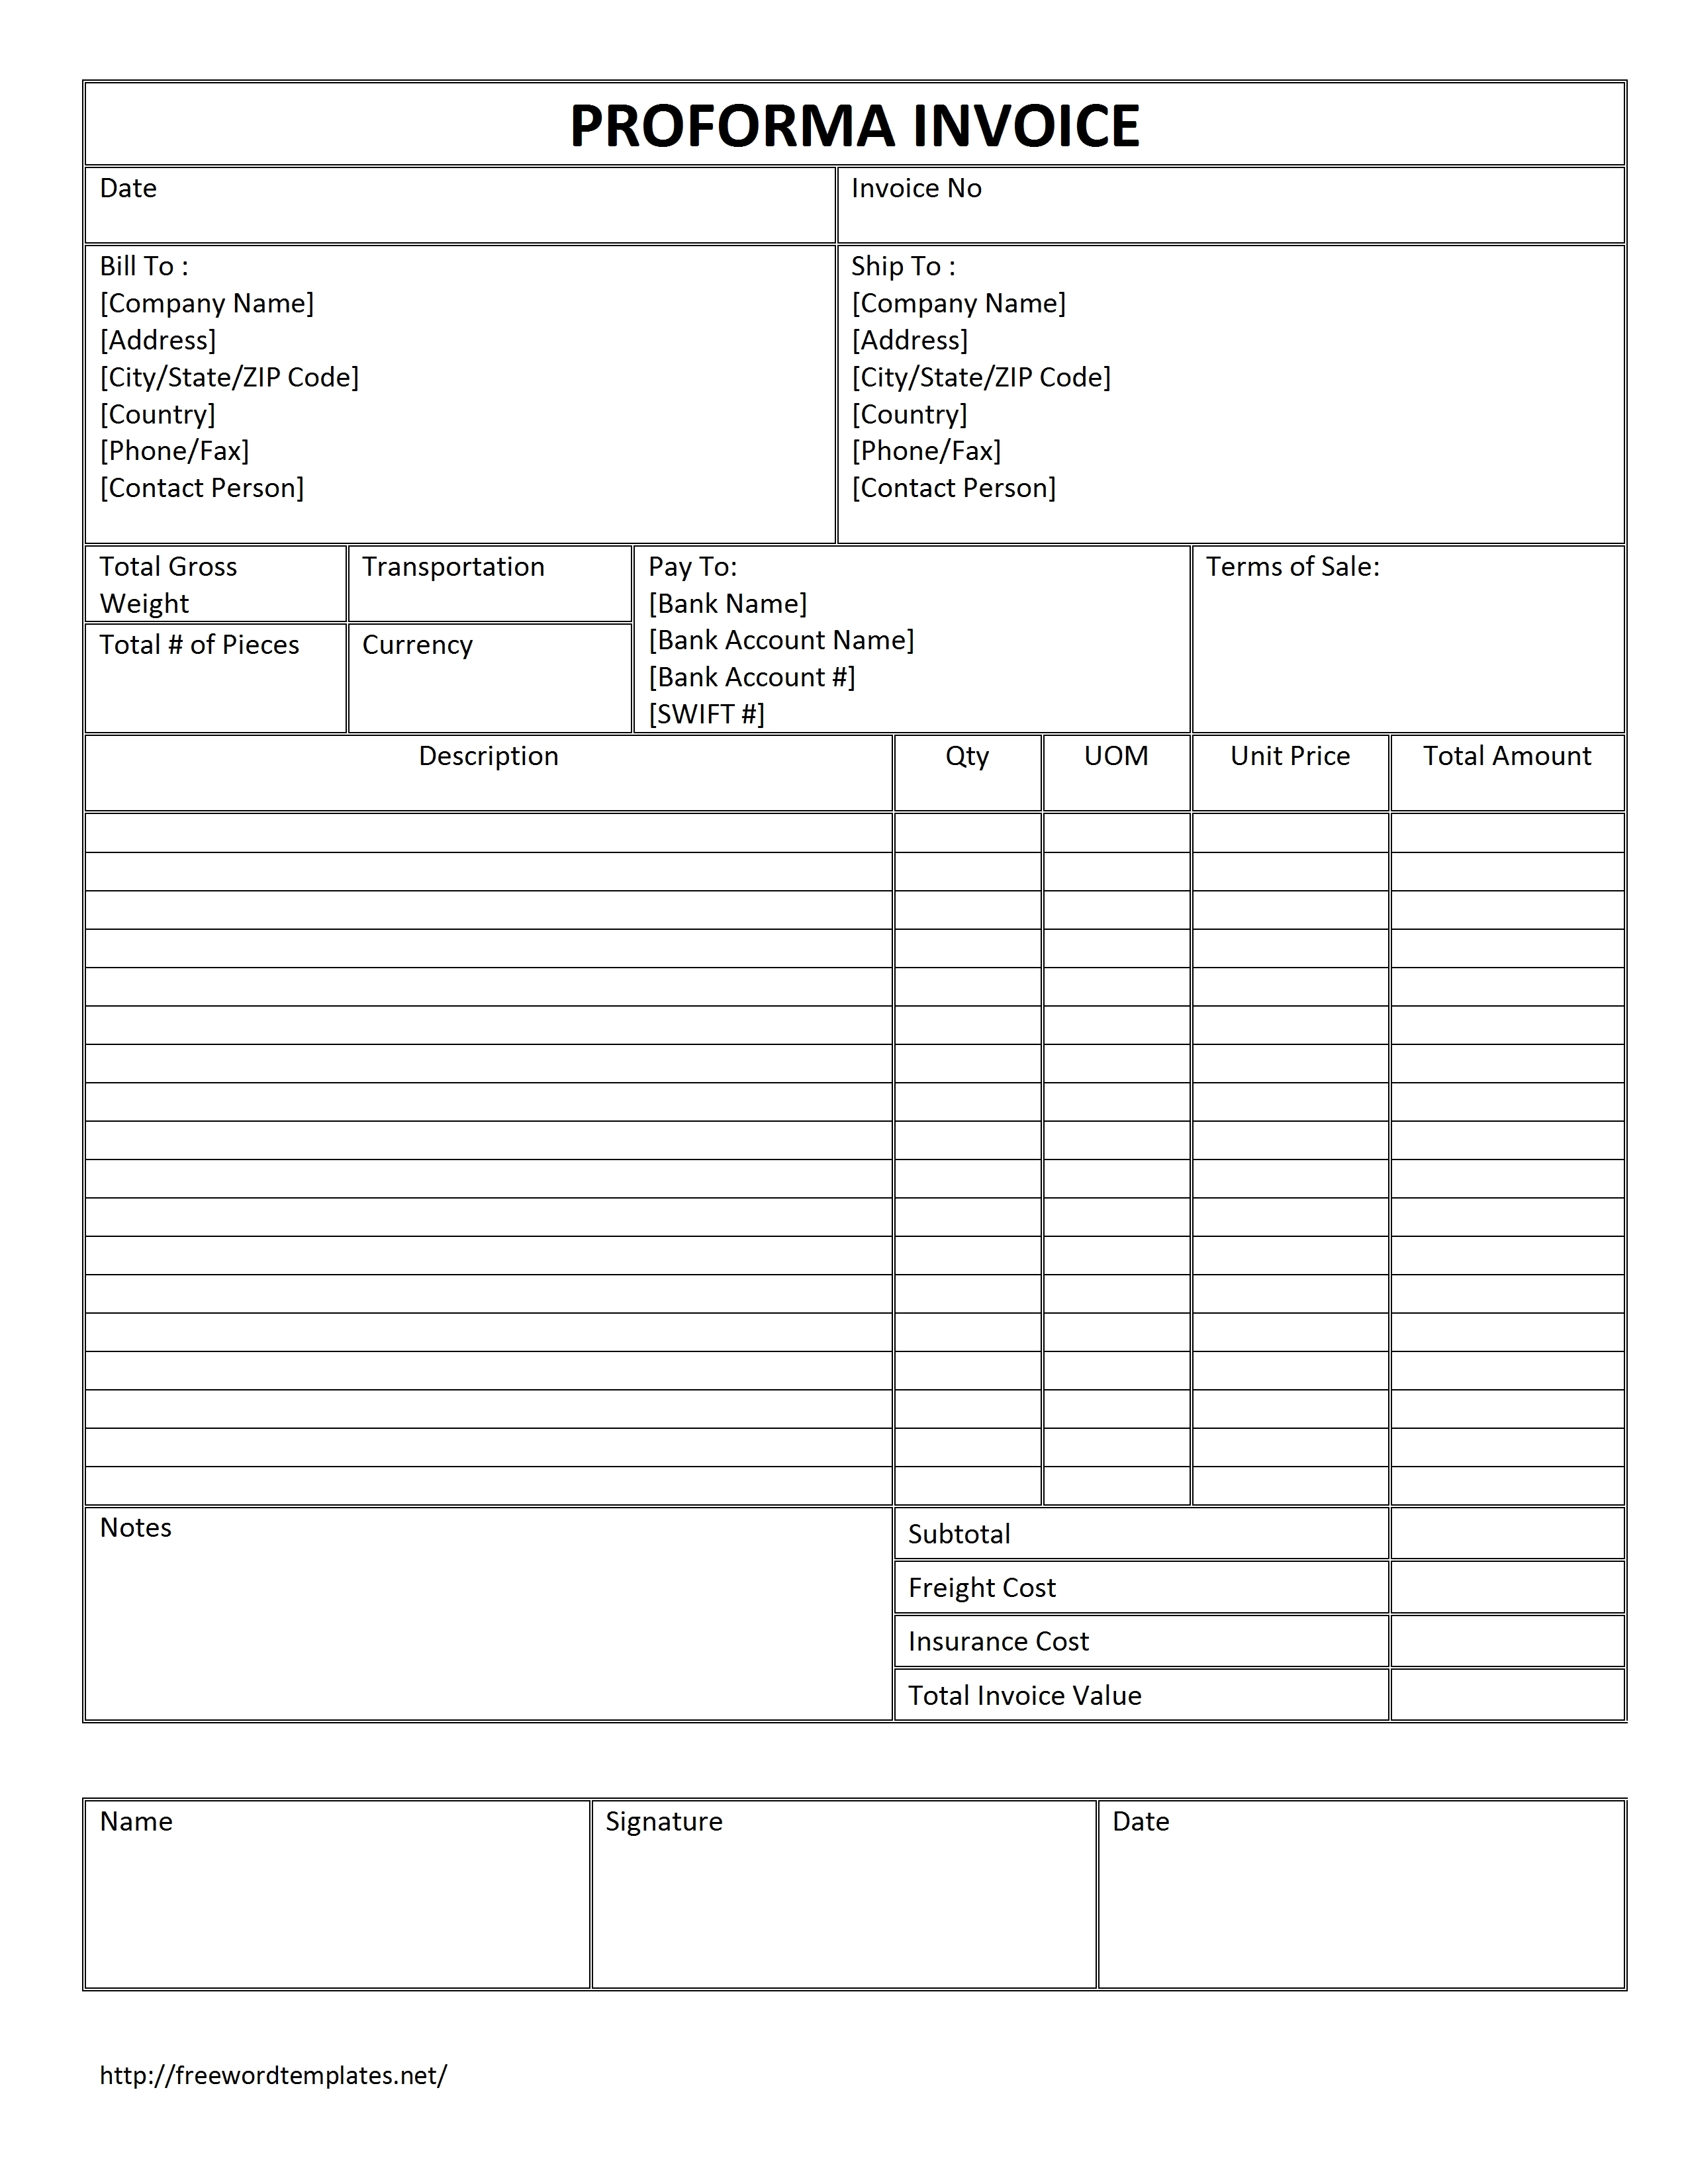 pro forma invoice free business template proforma invoice excel template